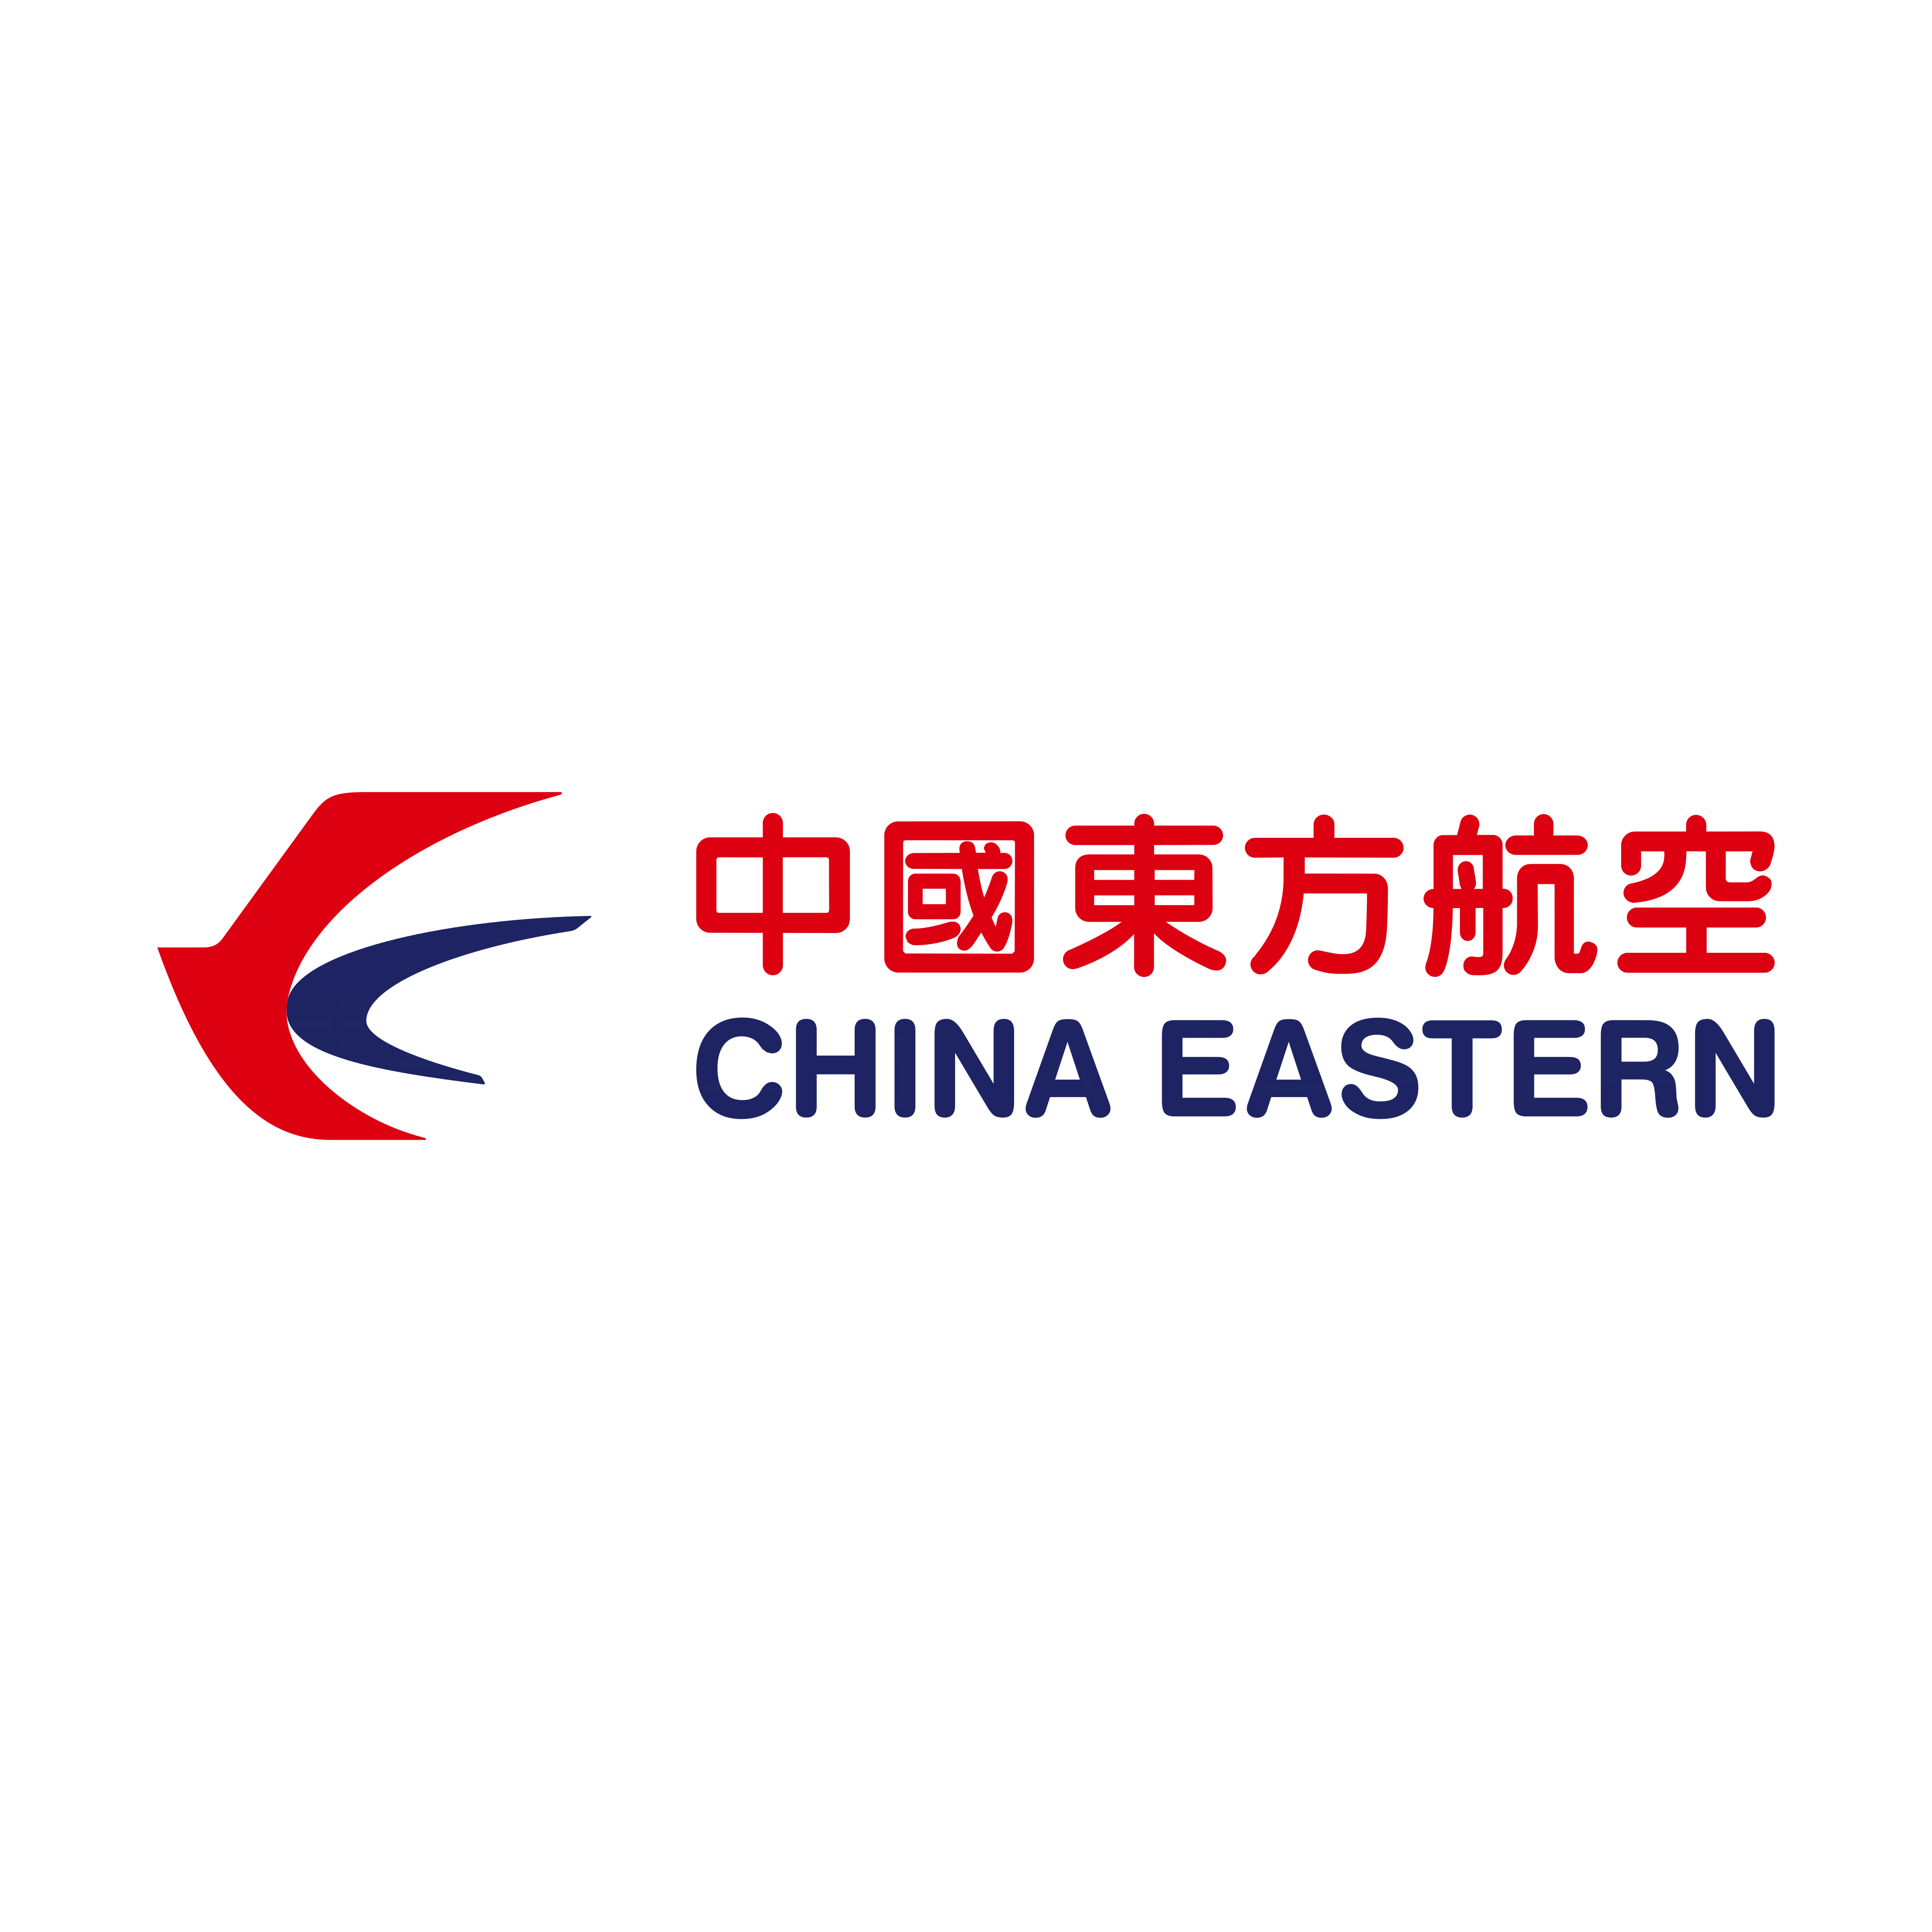 china eastern airlines logo 0 - China Eastern Airlines Logo